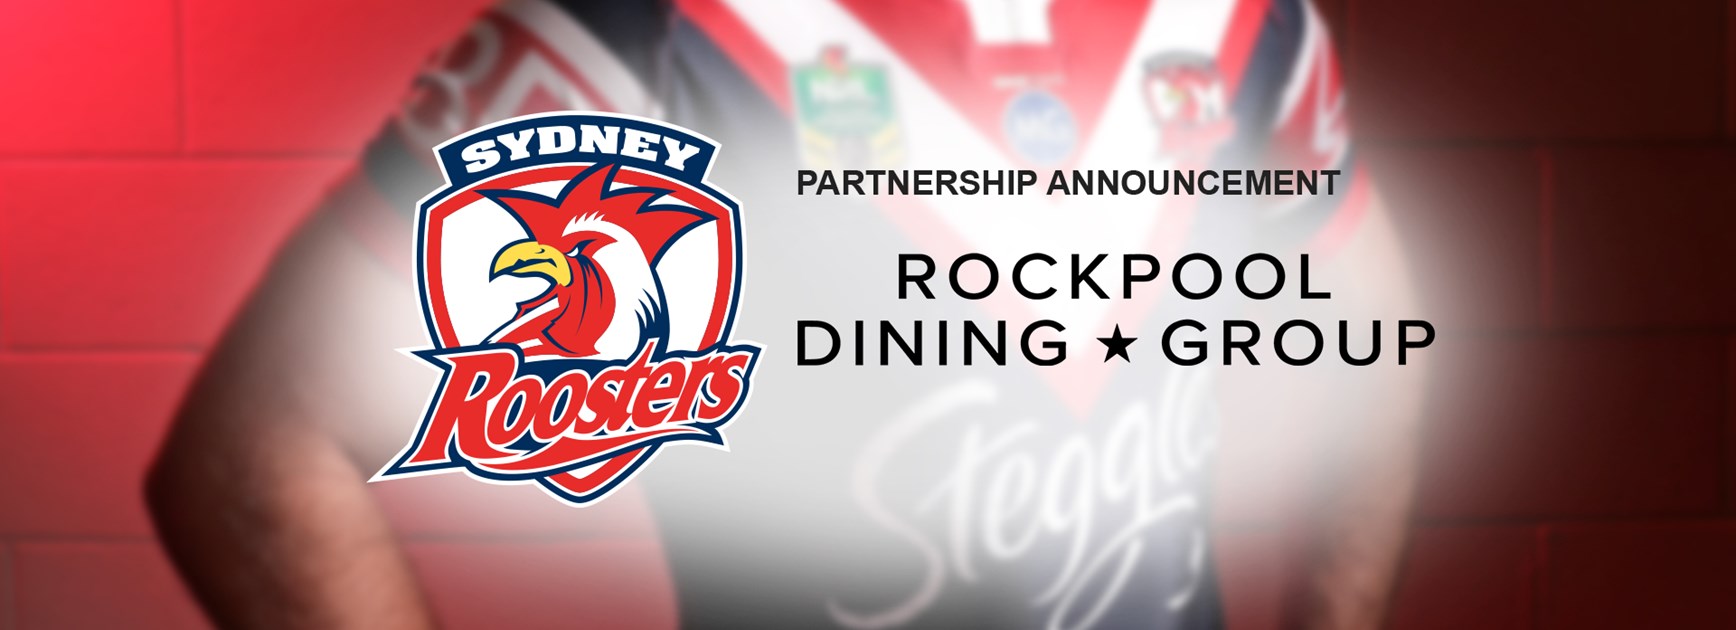 Roosters Partner With Rockpool Dining Group